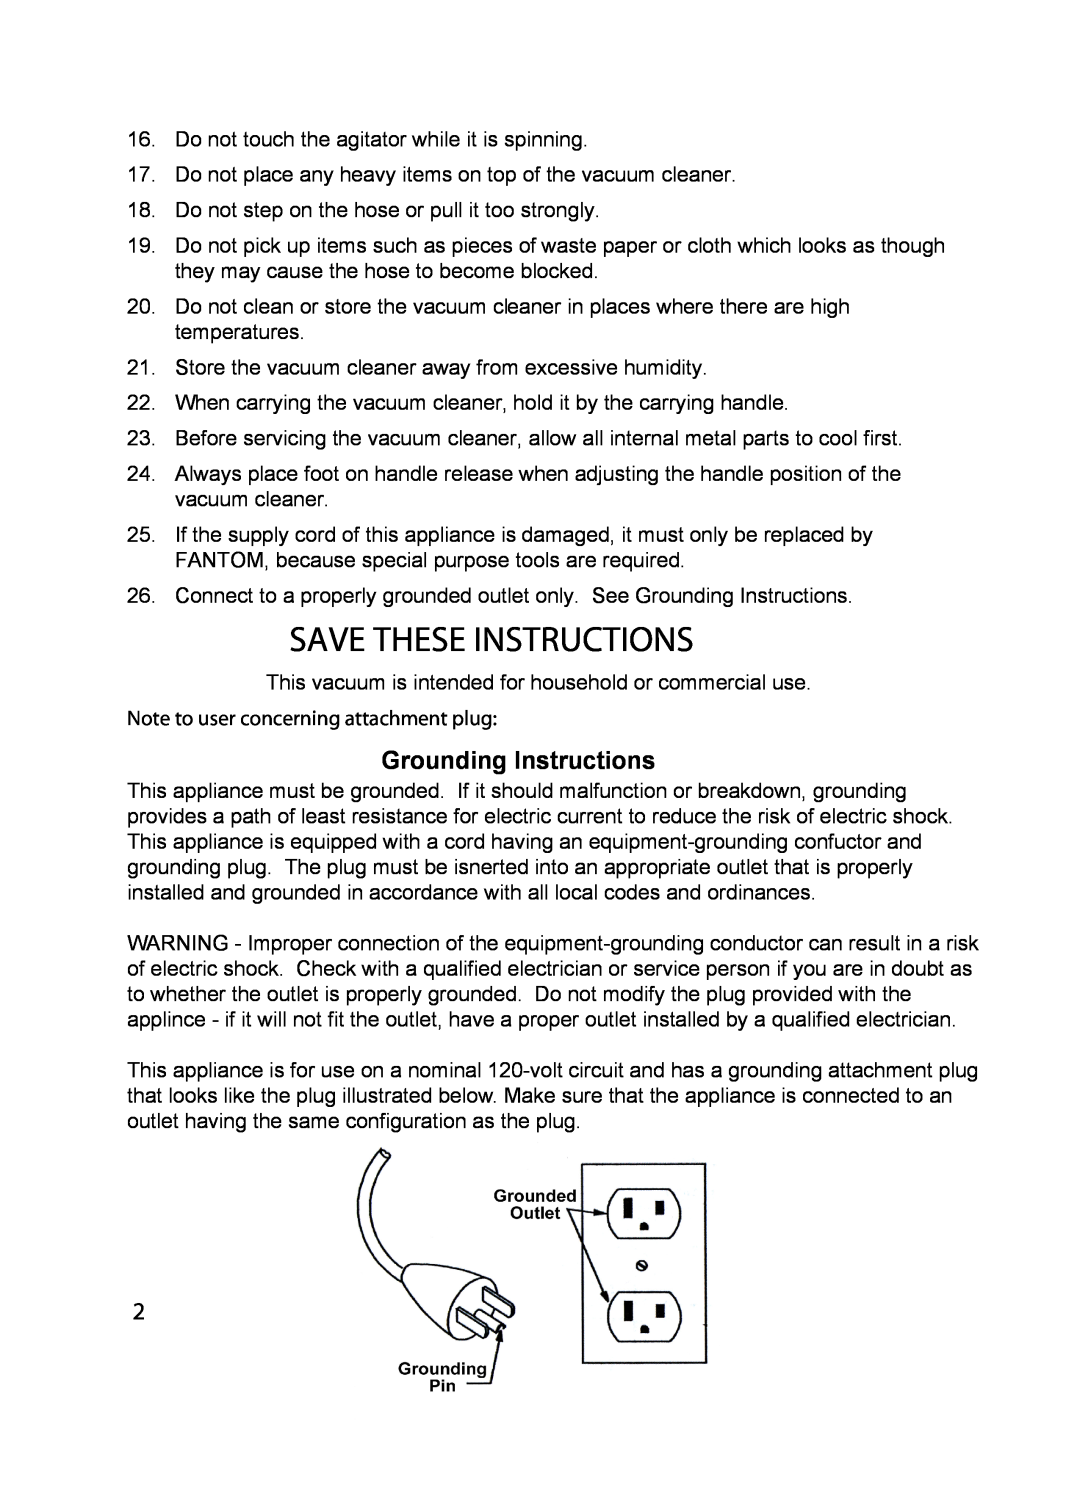 Fantom Vacuum FM742CS Save These Instructions, Grounding Instructions, Note to user concerning attachment plug 